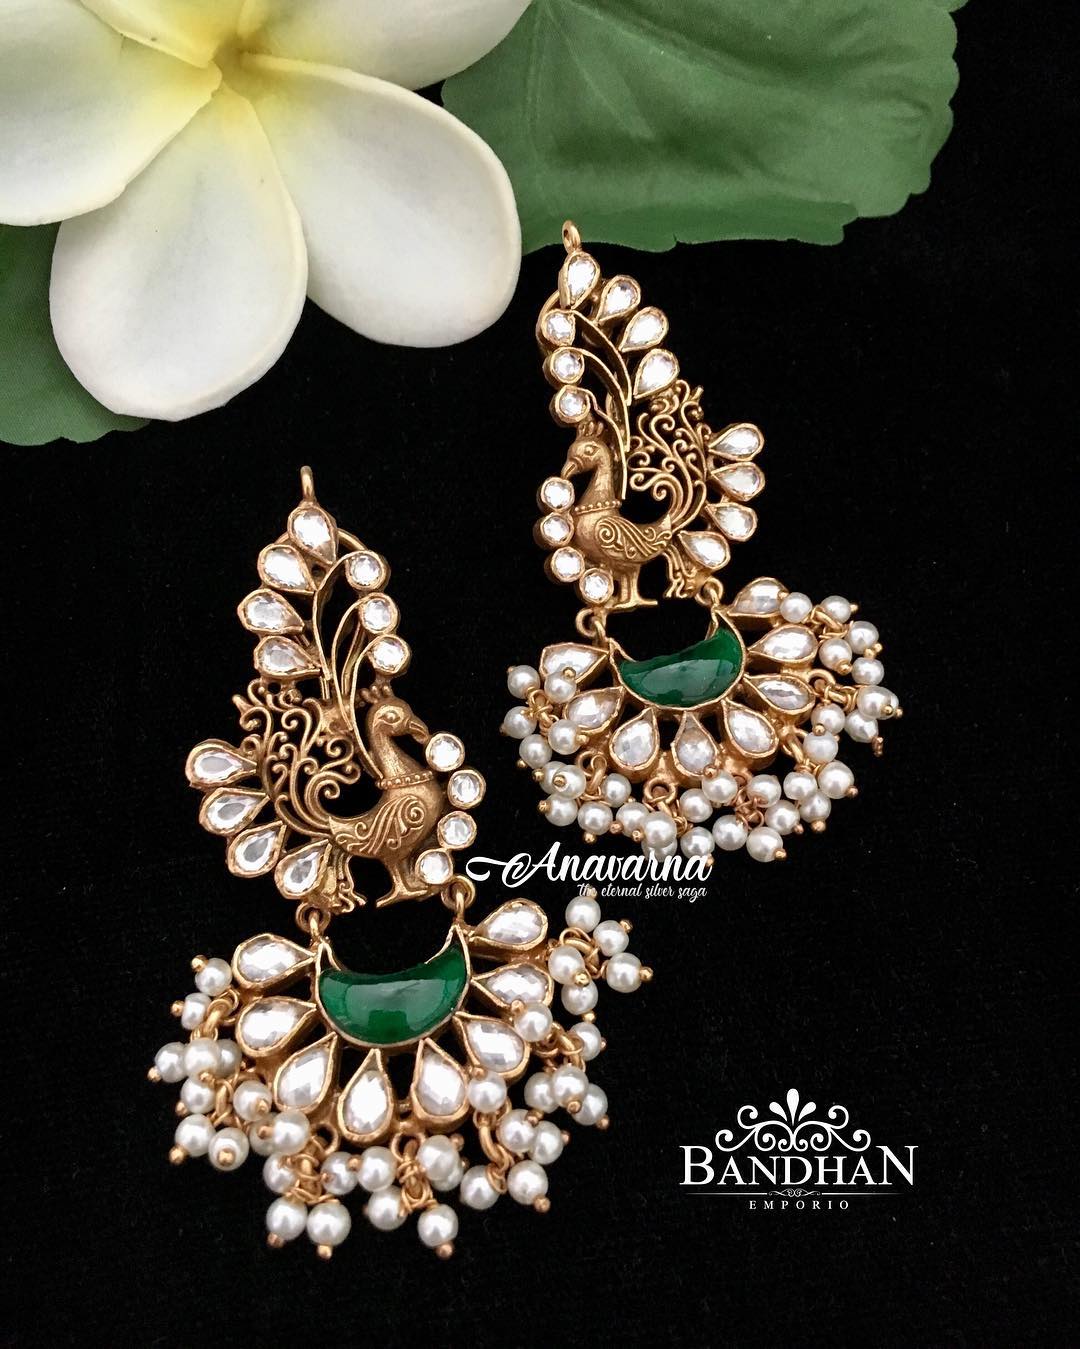 Attractive Earring From Bandhan